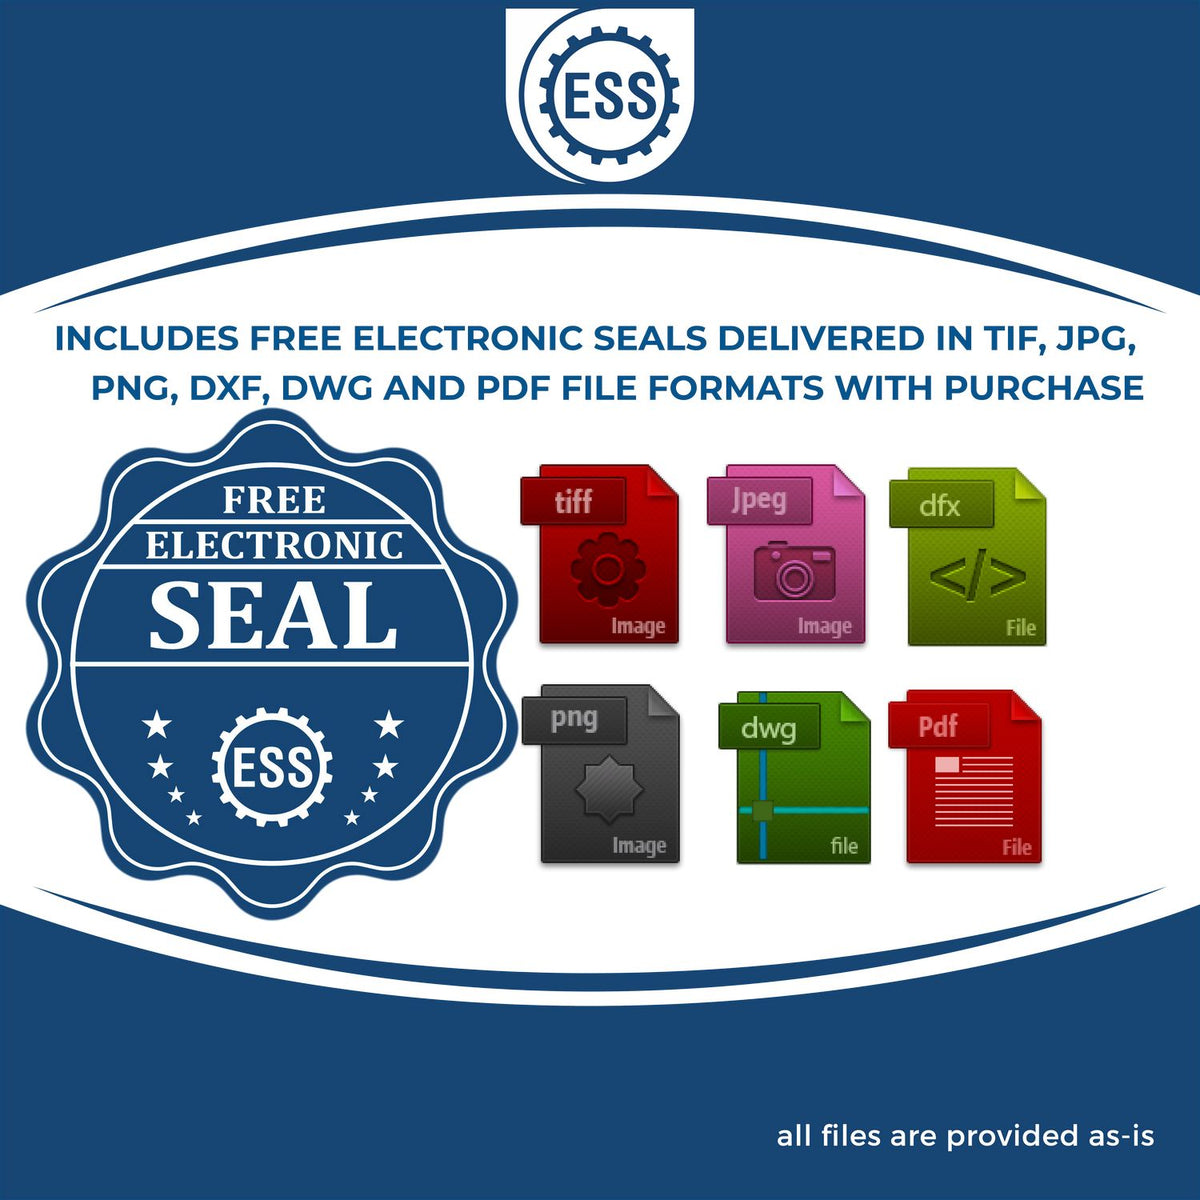 An infographic for the free electronic seal for the Long Reach New Hampshire Geology Seal illustrating the different file type icons such as DXF, DWG, TIF, JPG and PNG.